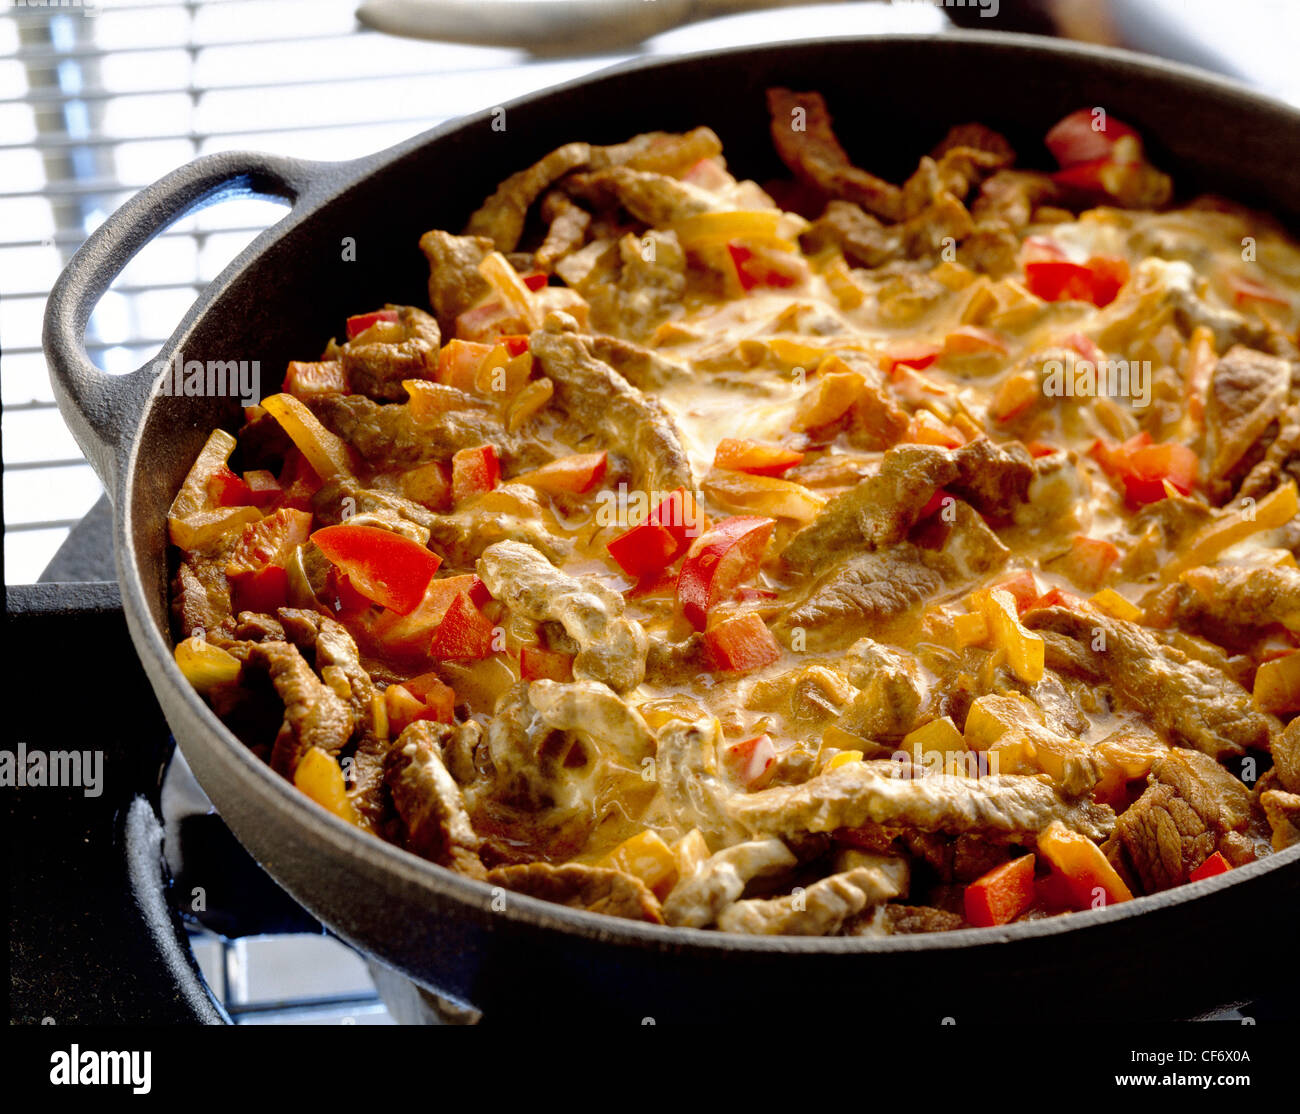 Tasty Autumn Casseroles Quick goulash, stewing steak, red peppers, onions and creamy sauce, in large black casserole dish Mat Stock Photo